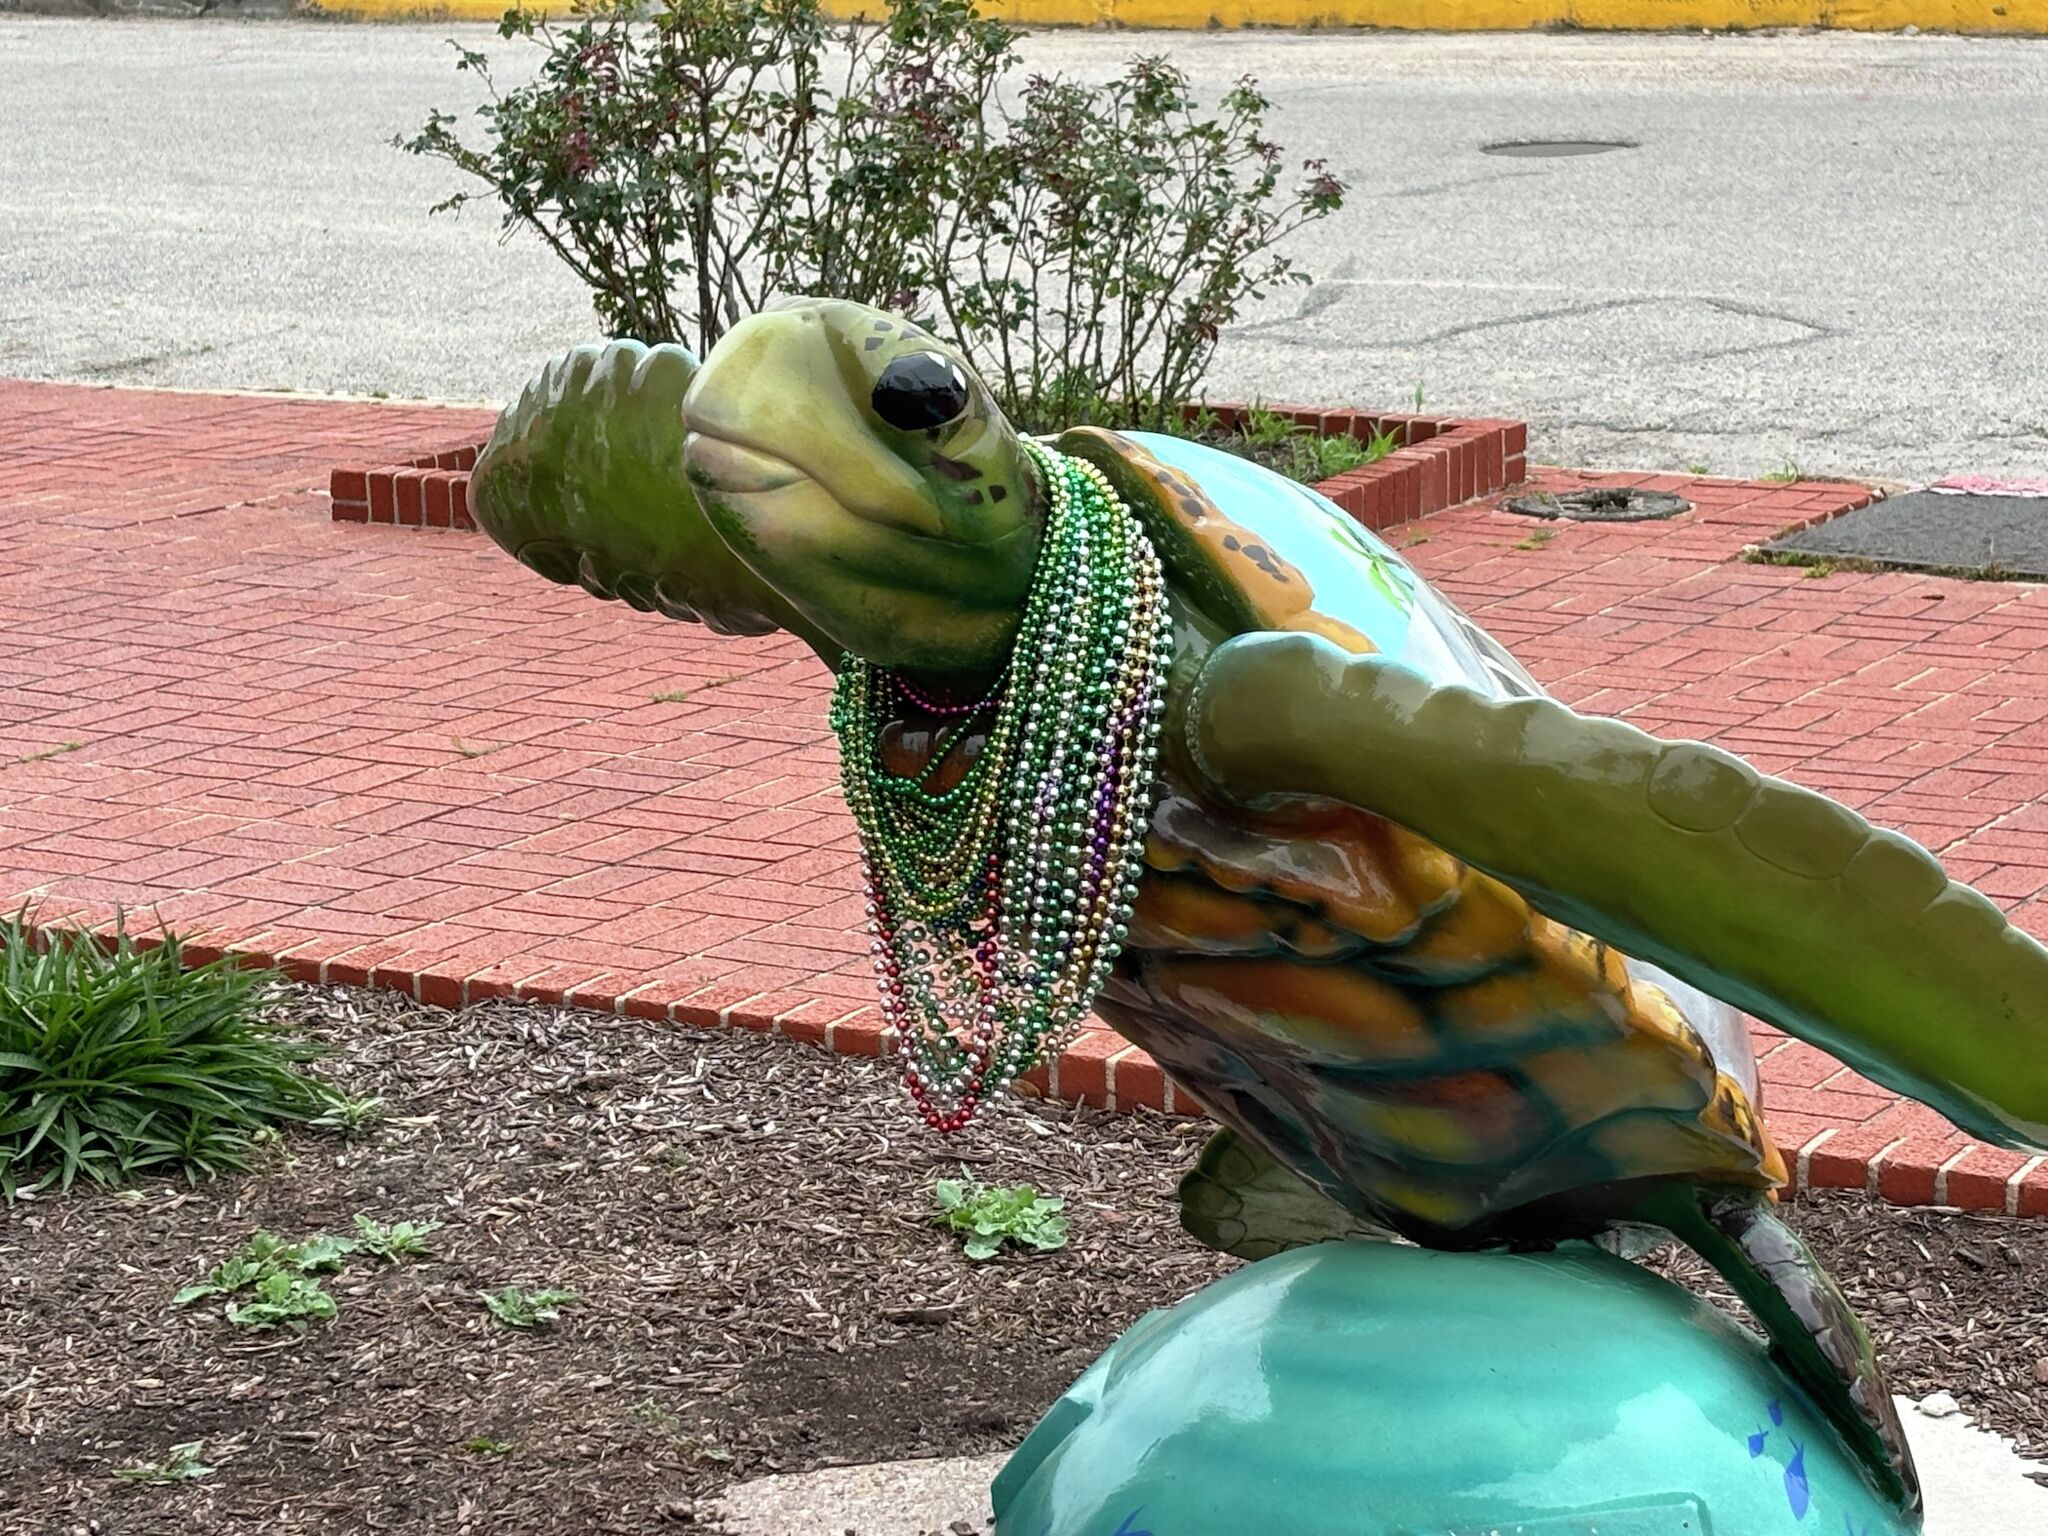 Galveston Enjoys Bright Turtle Statues but Repairing Them Can Be a Hassle